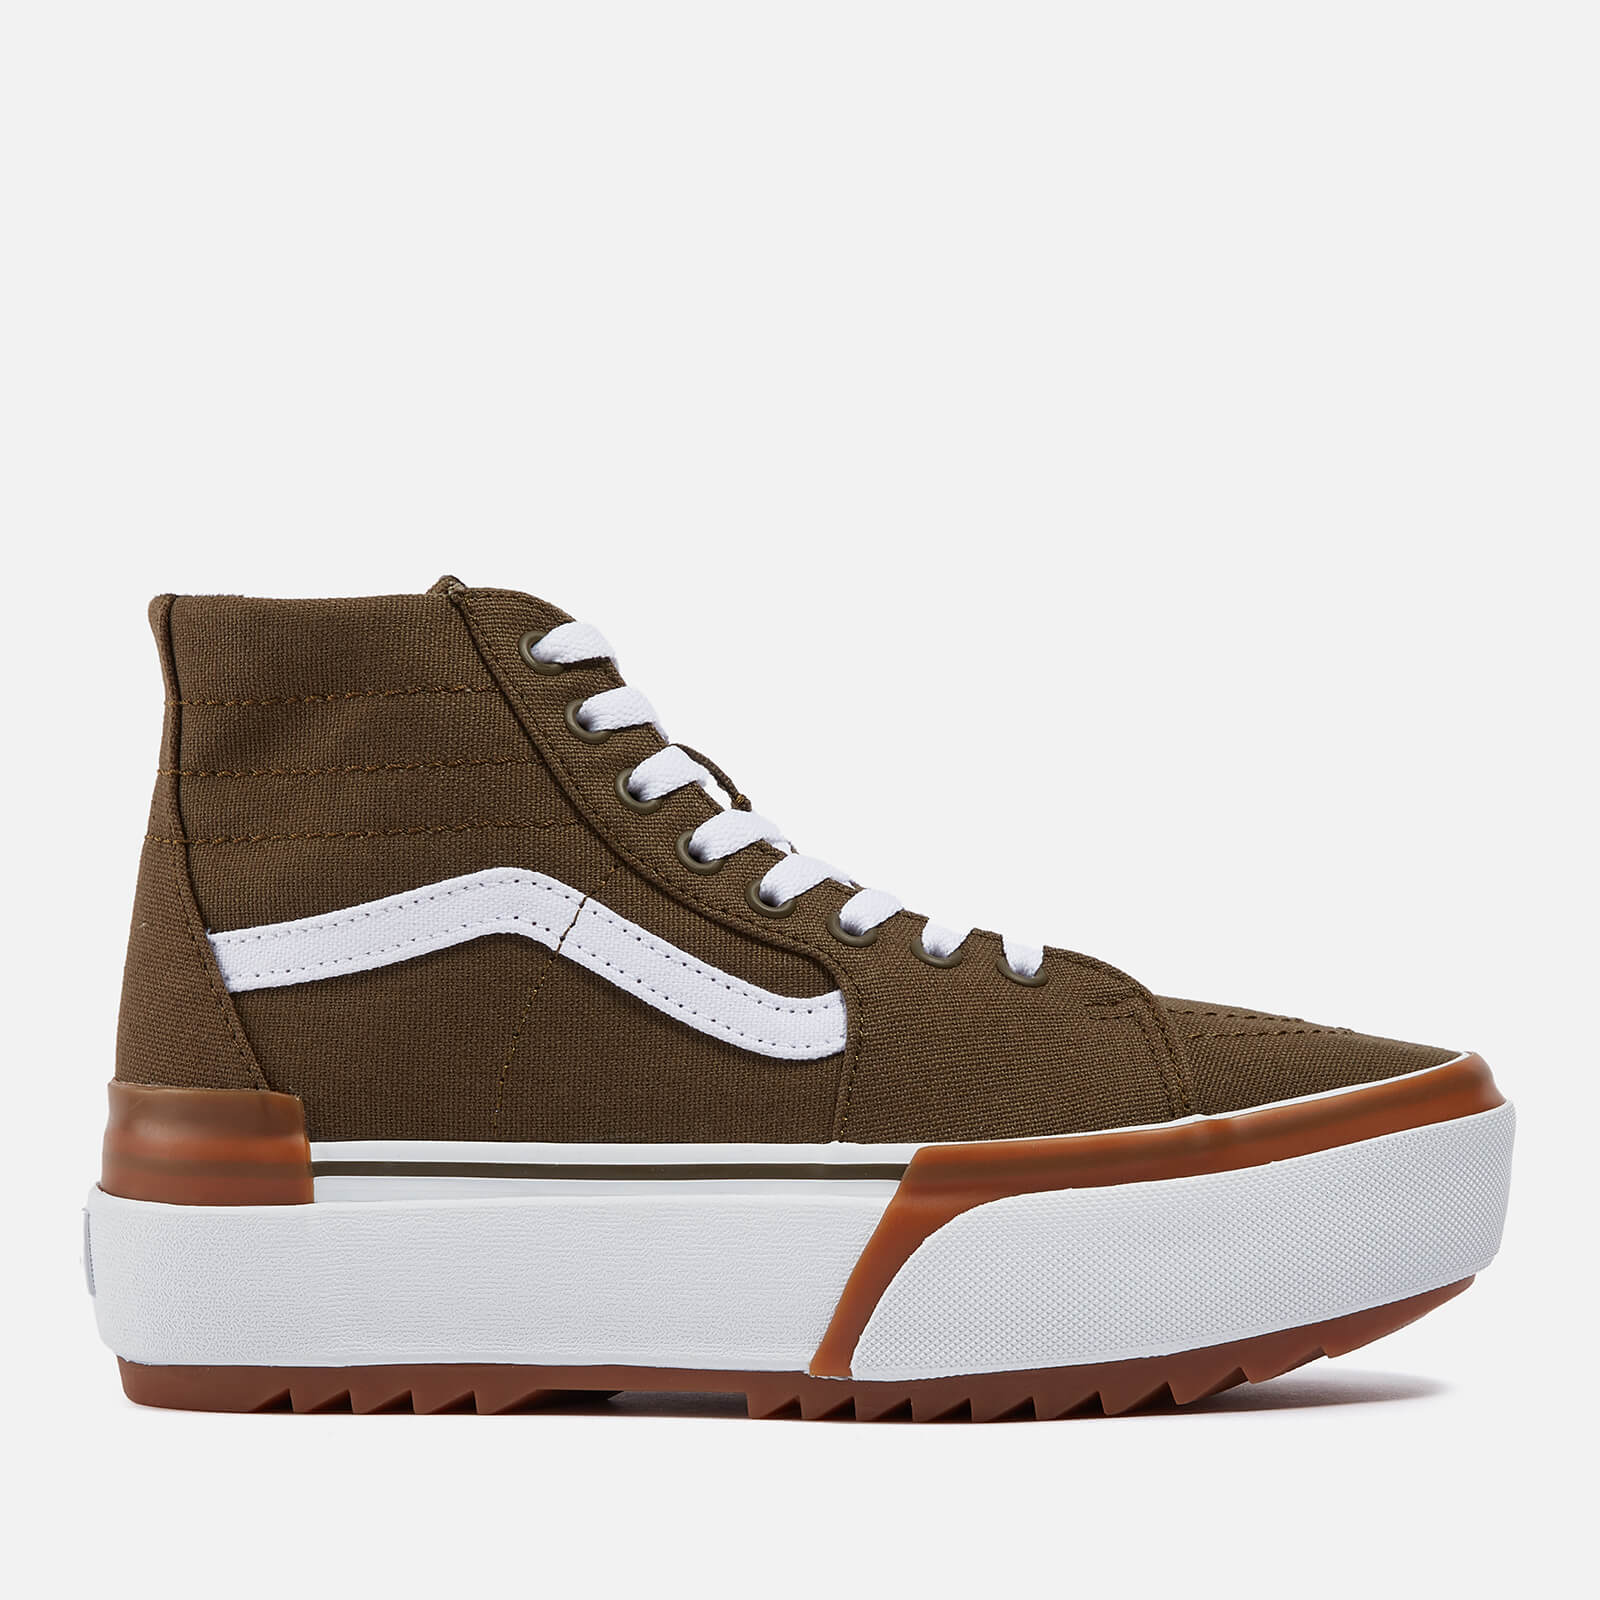 Vans Women’s Canvas Sk8-Hi Stacked Canvas Trainers